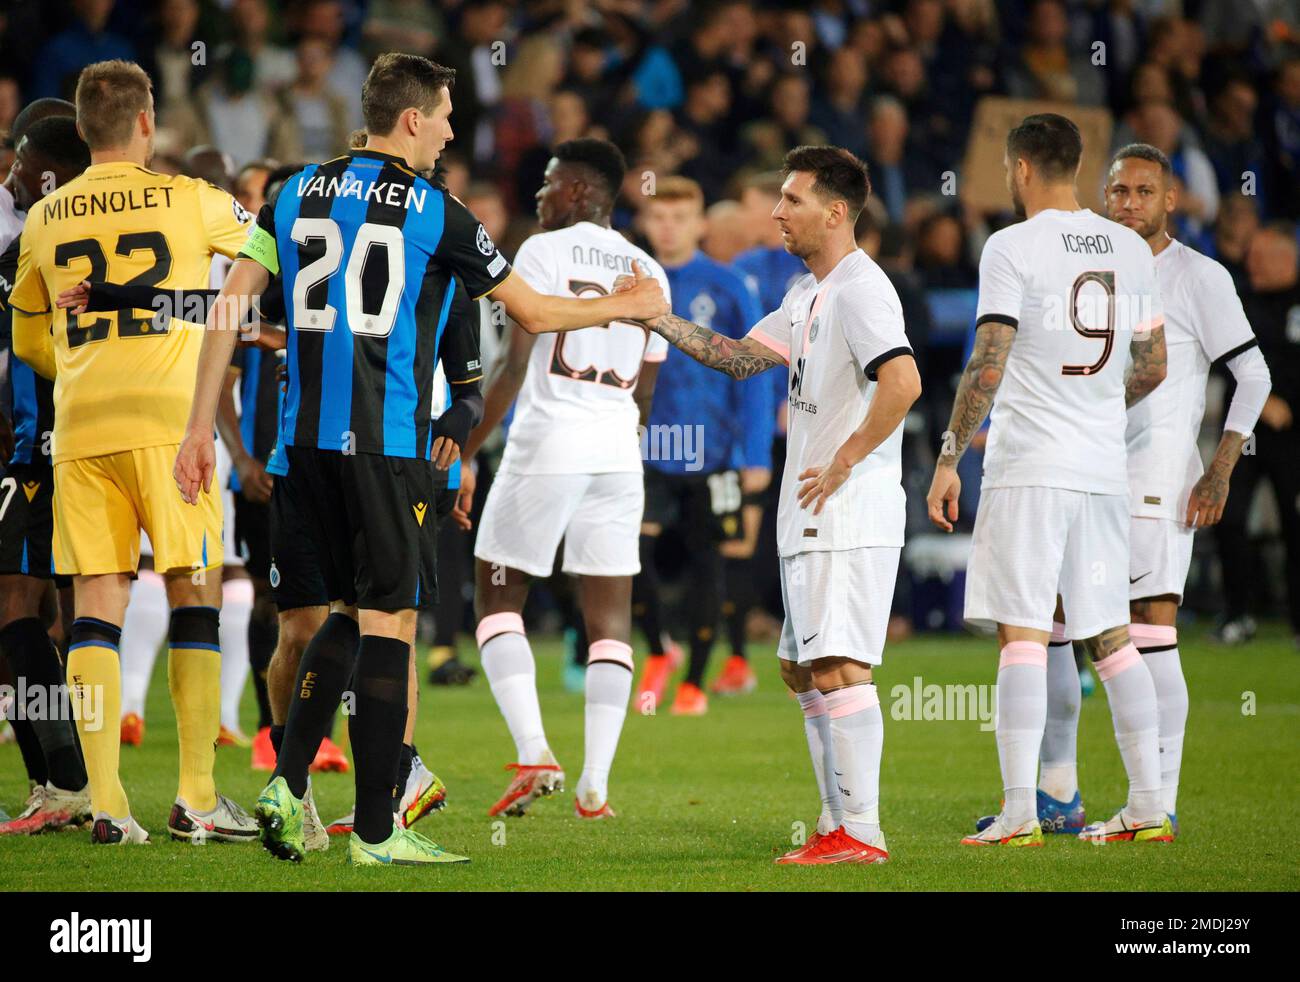 PSG's Lionel Messi, center right, shakes hands with Brugge's Hans Vanaken,  center left, at the end of the Champions League Group A soccer match  between Club Brugge and PSG at the Jan